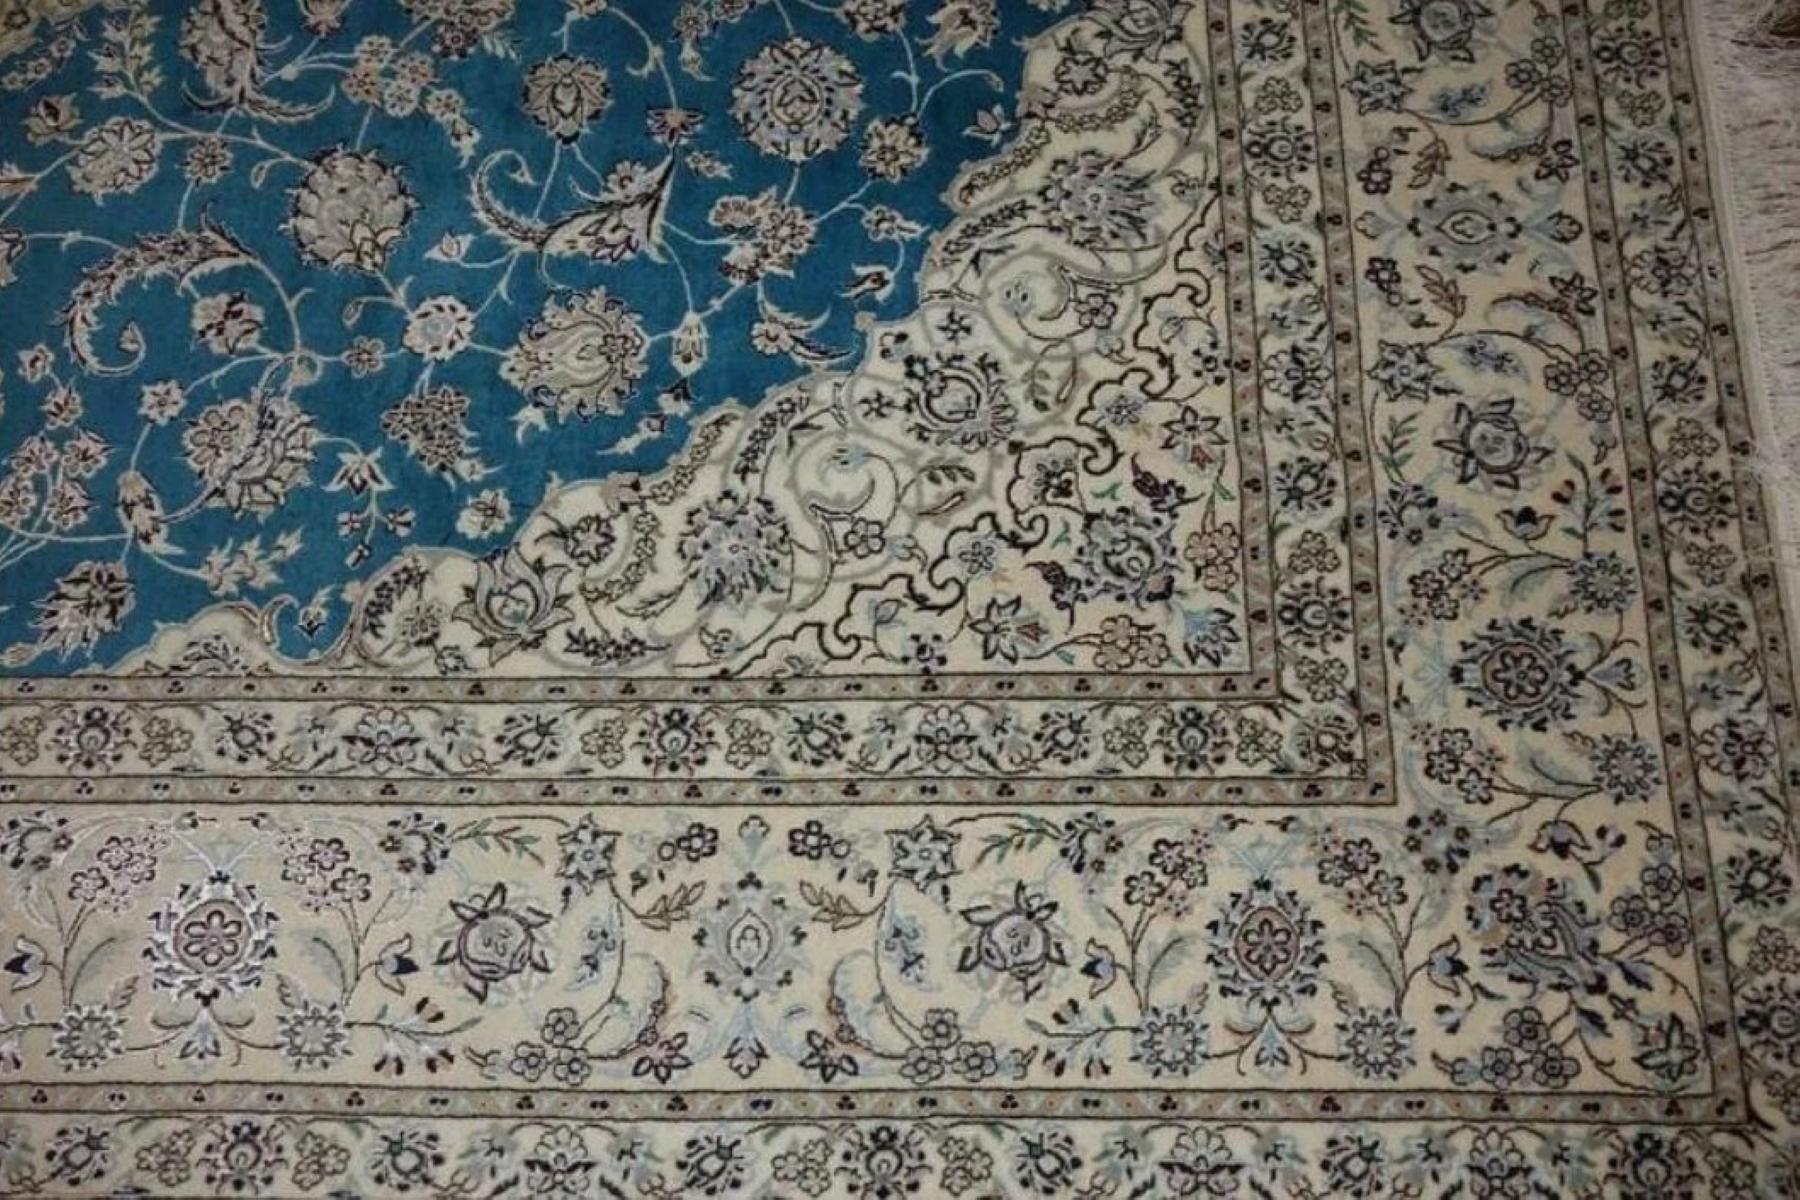 Very fine Persian Rug Nain 500 Knots per inch, Size 10.5 x 7.2 Iran Nain Habbibian Wool and Silk. Around 5,000,000 knots tied by hand one by one. It takes 3 years to complete this piece of art.